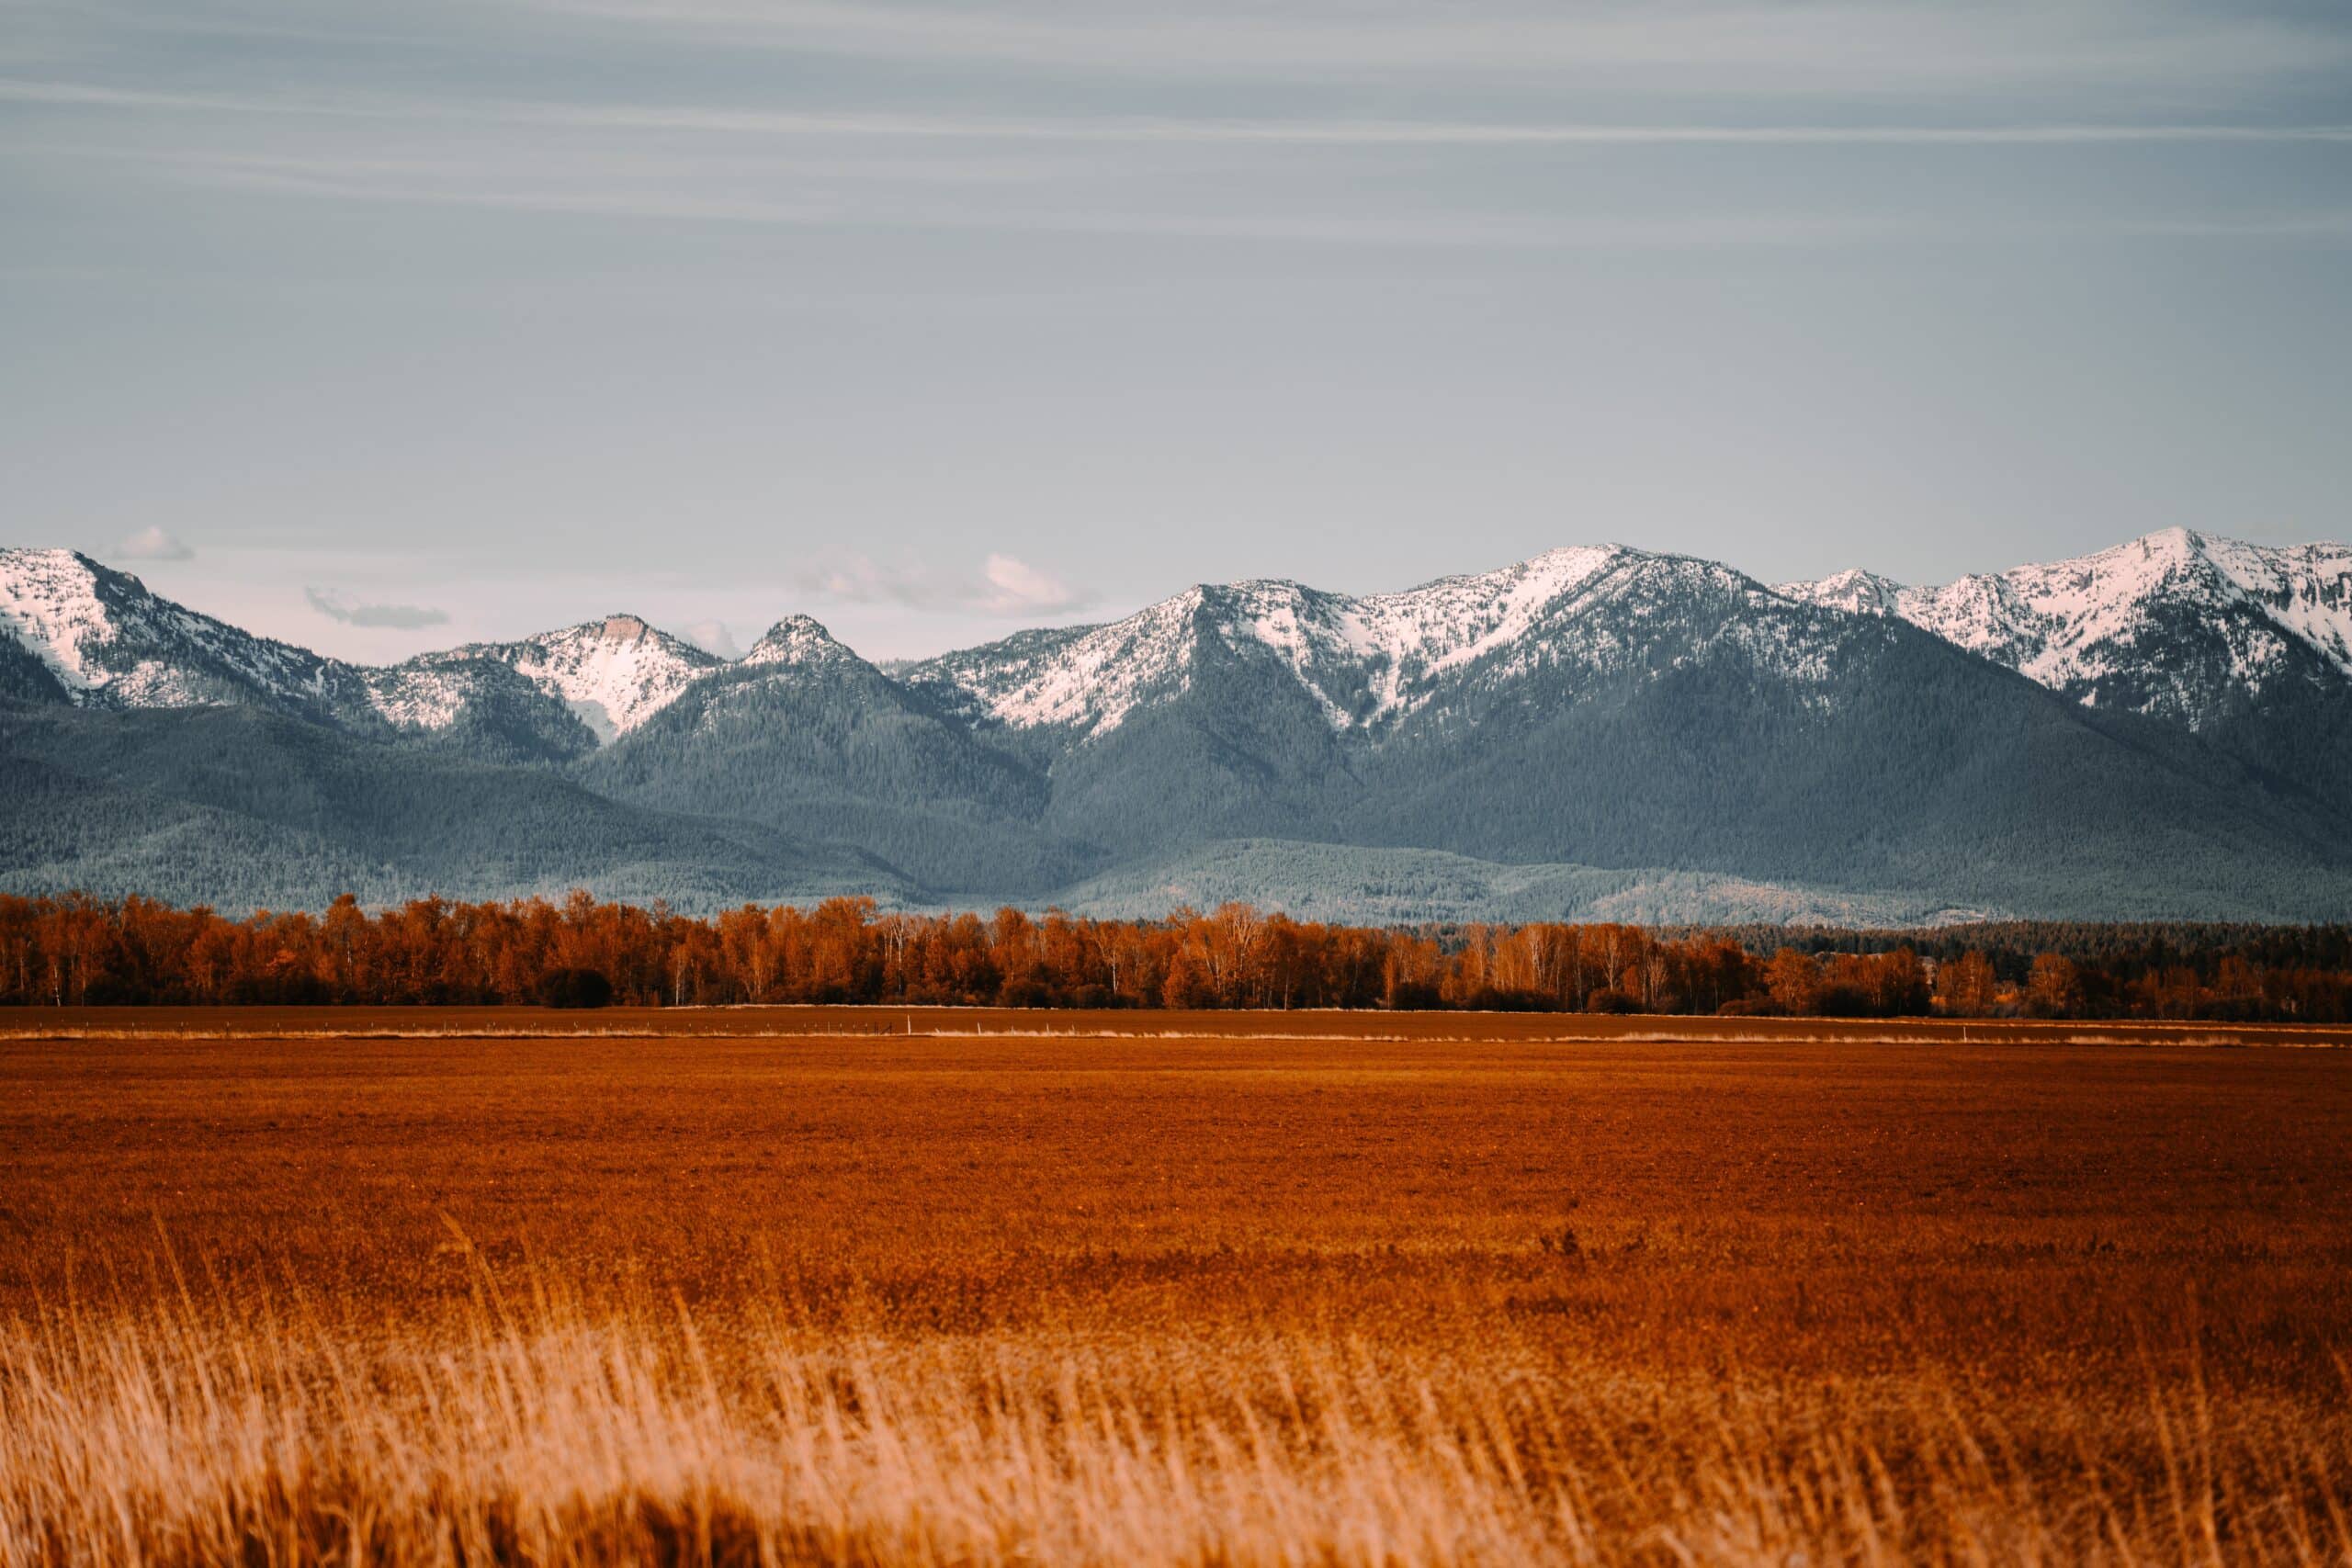 An open field in Montana. Mountains dominate the horizon while the foreground is flush with rolling fields.